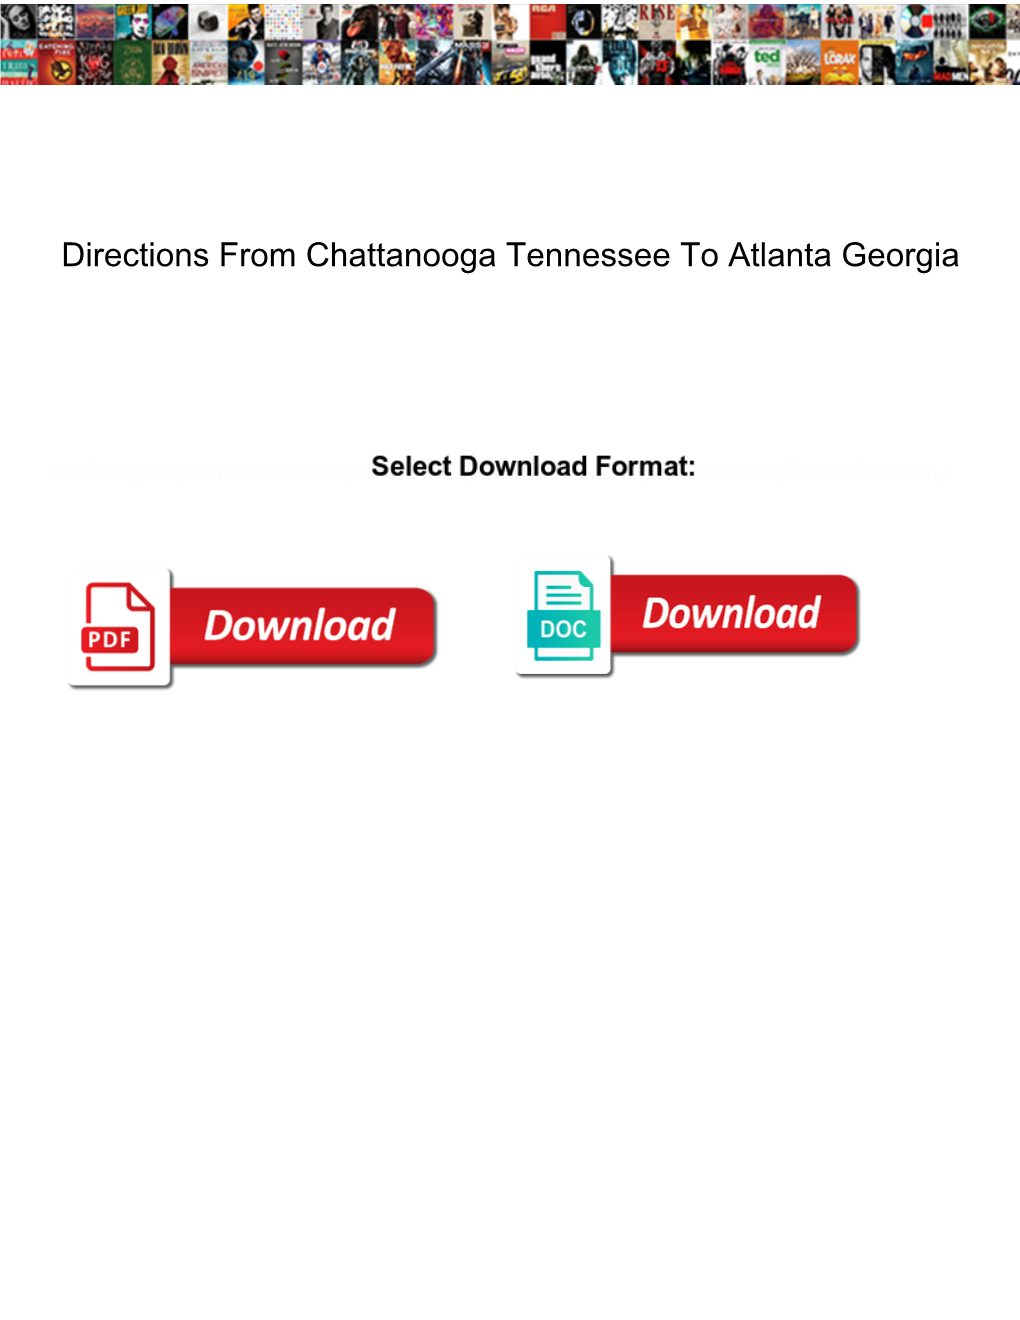 Directions from Chattanooga Tennessee to Atlanta Georgia